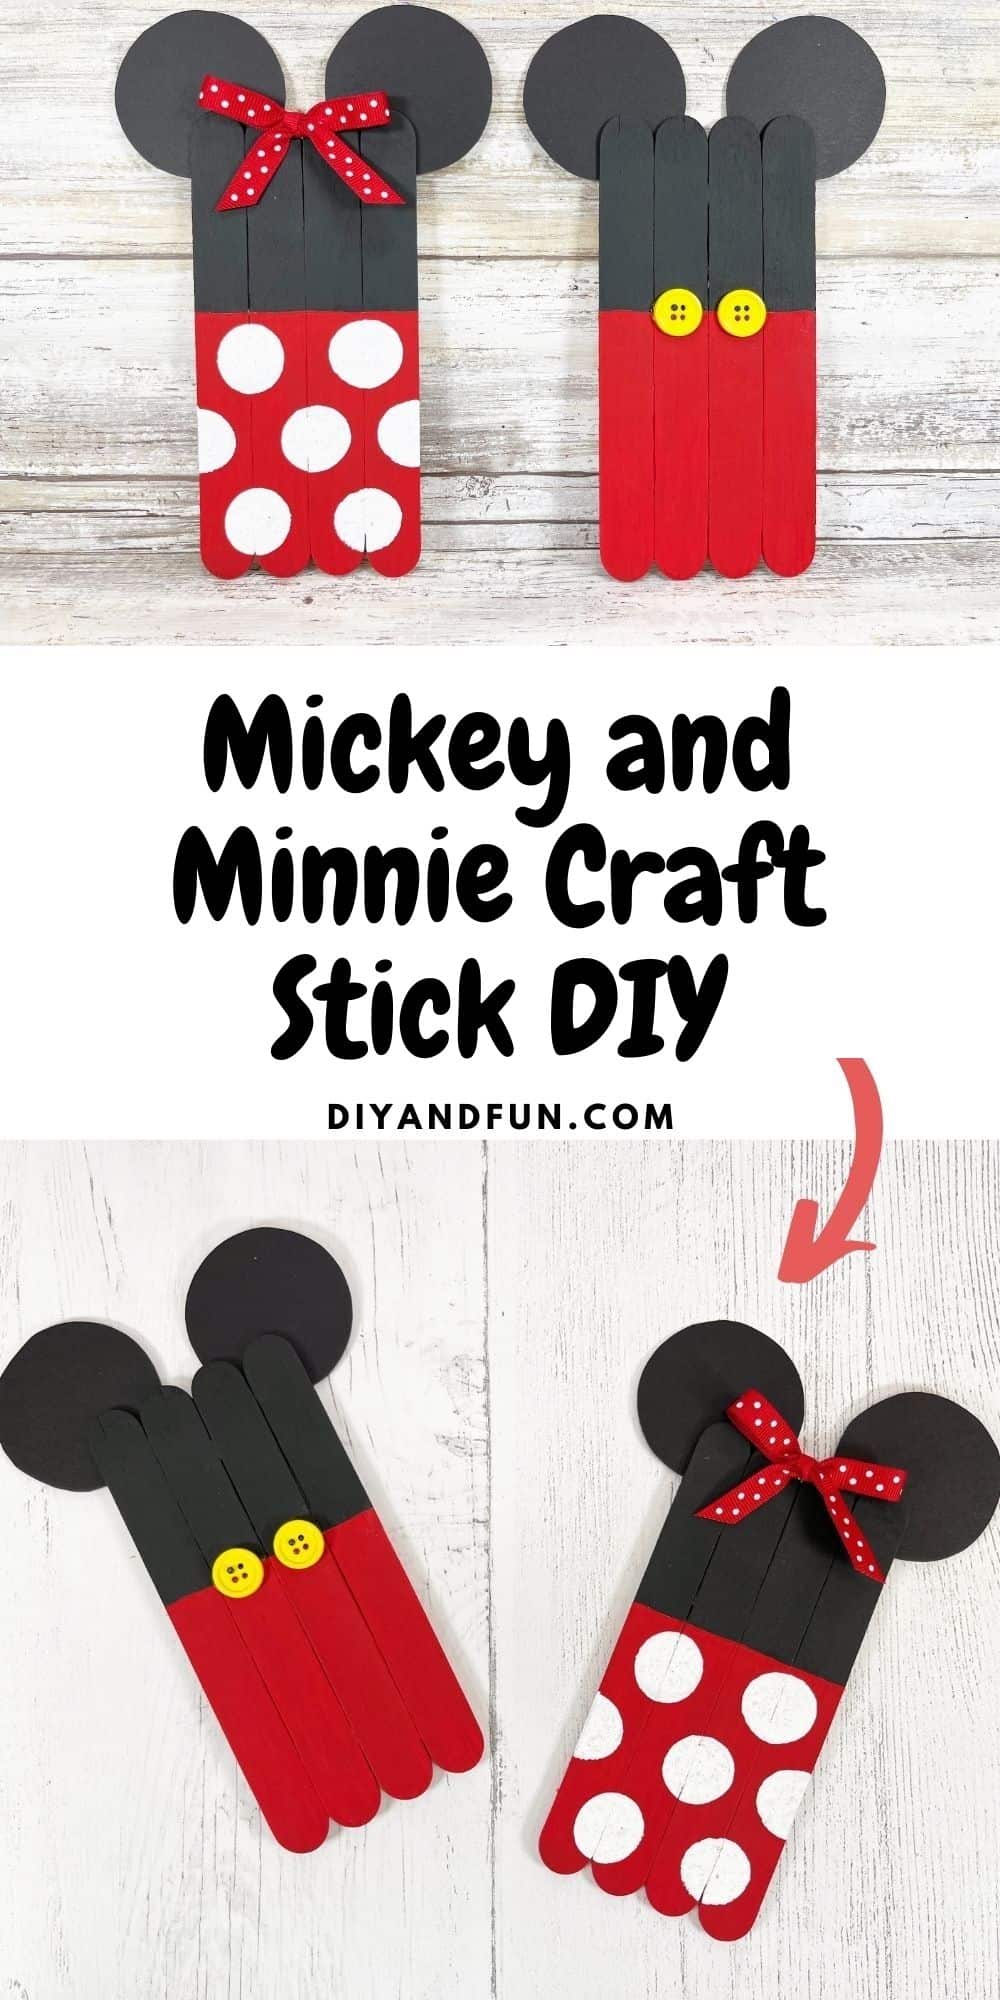 Micky and Minnie Craft Stick DIY, a fun do it yourself craft idea suitable for most ages made with dollar store materials.